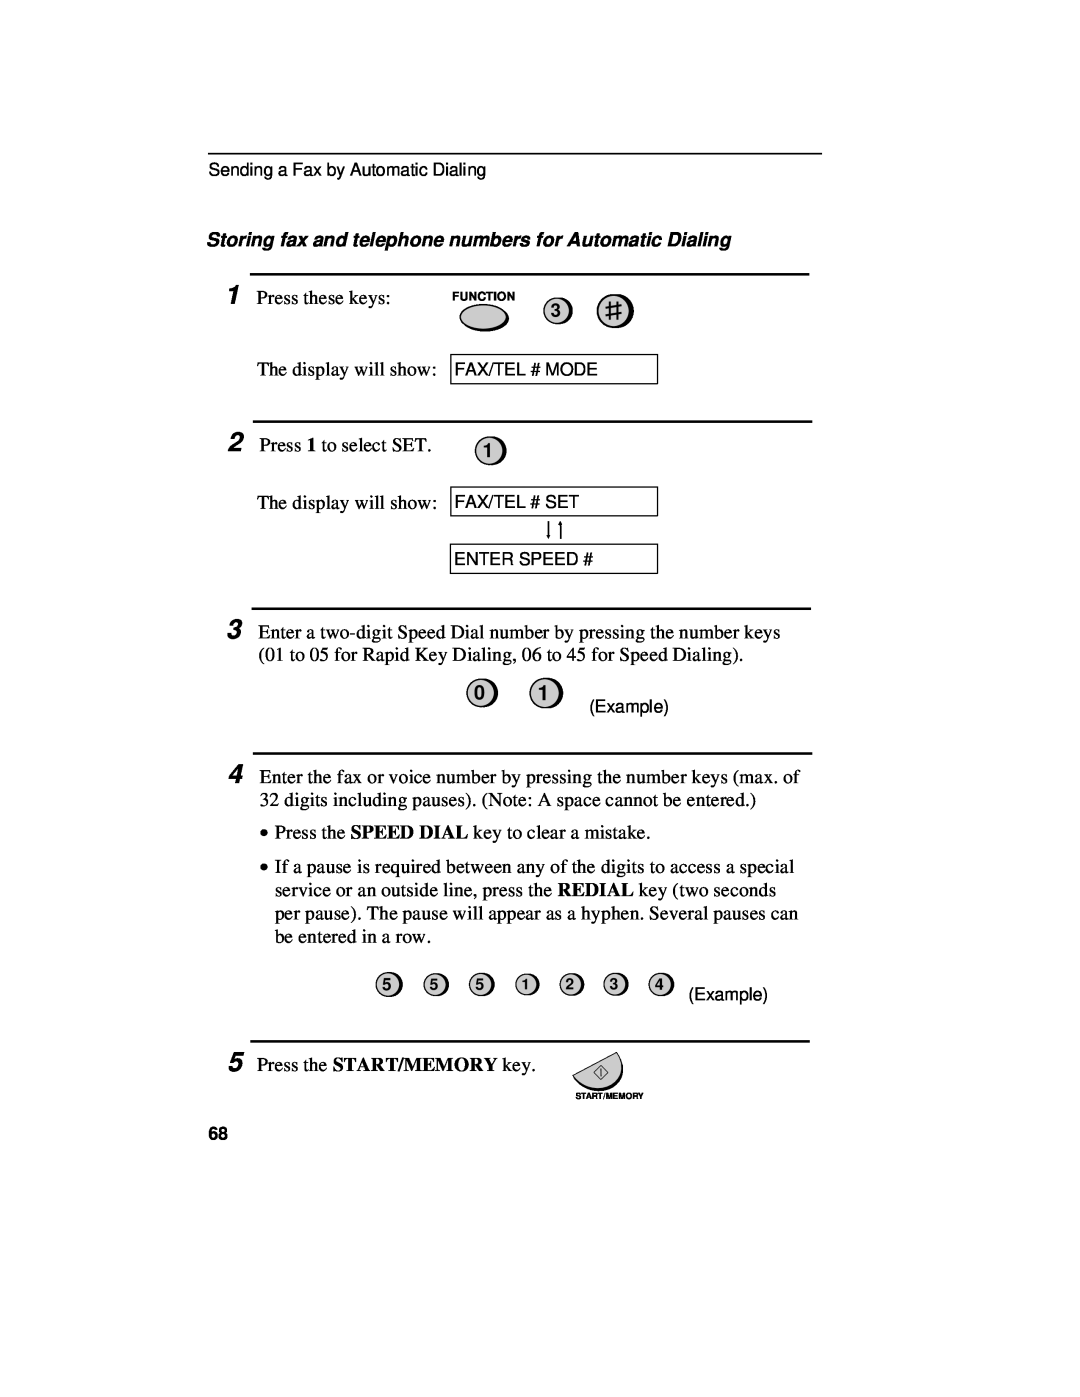 Sharp UX-460 operation manual Storing fax and telephone numbers for Automatic Dialing 